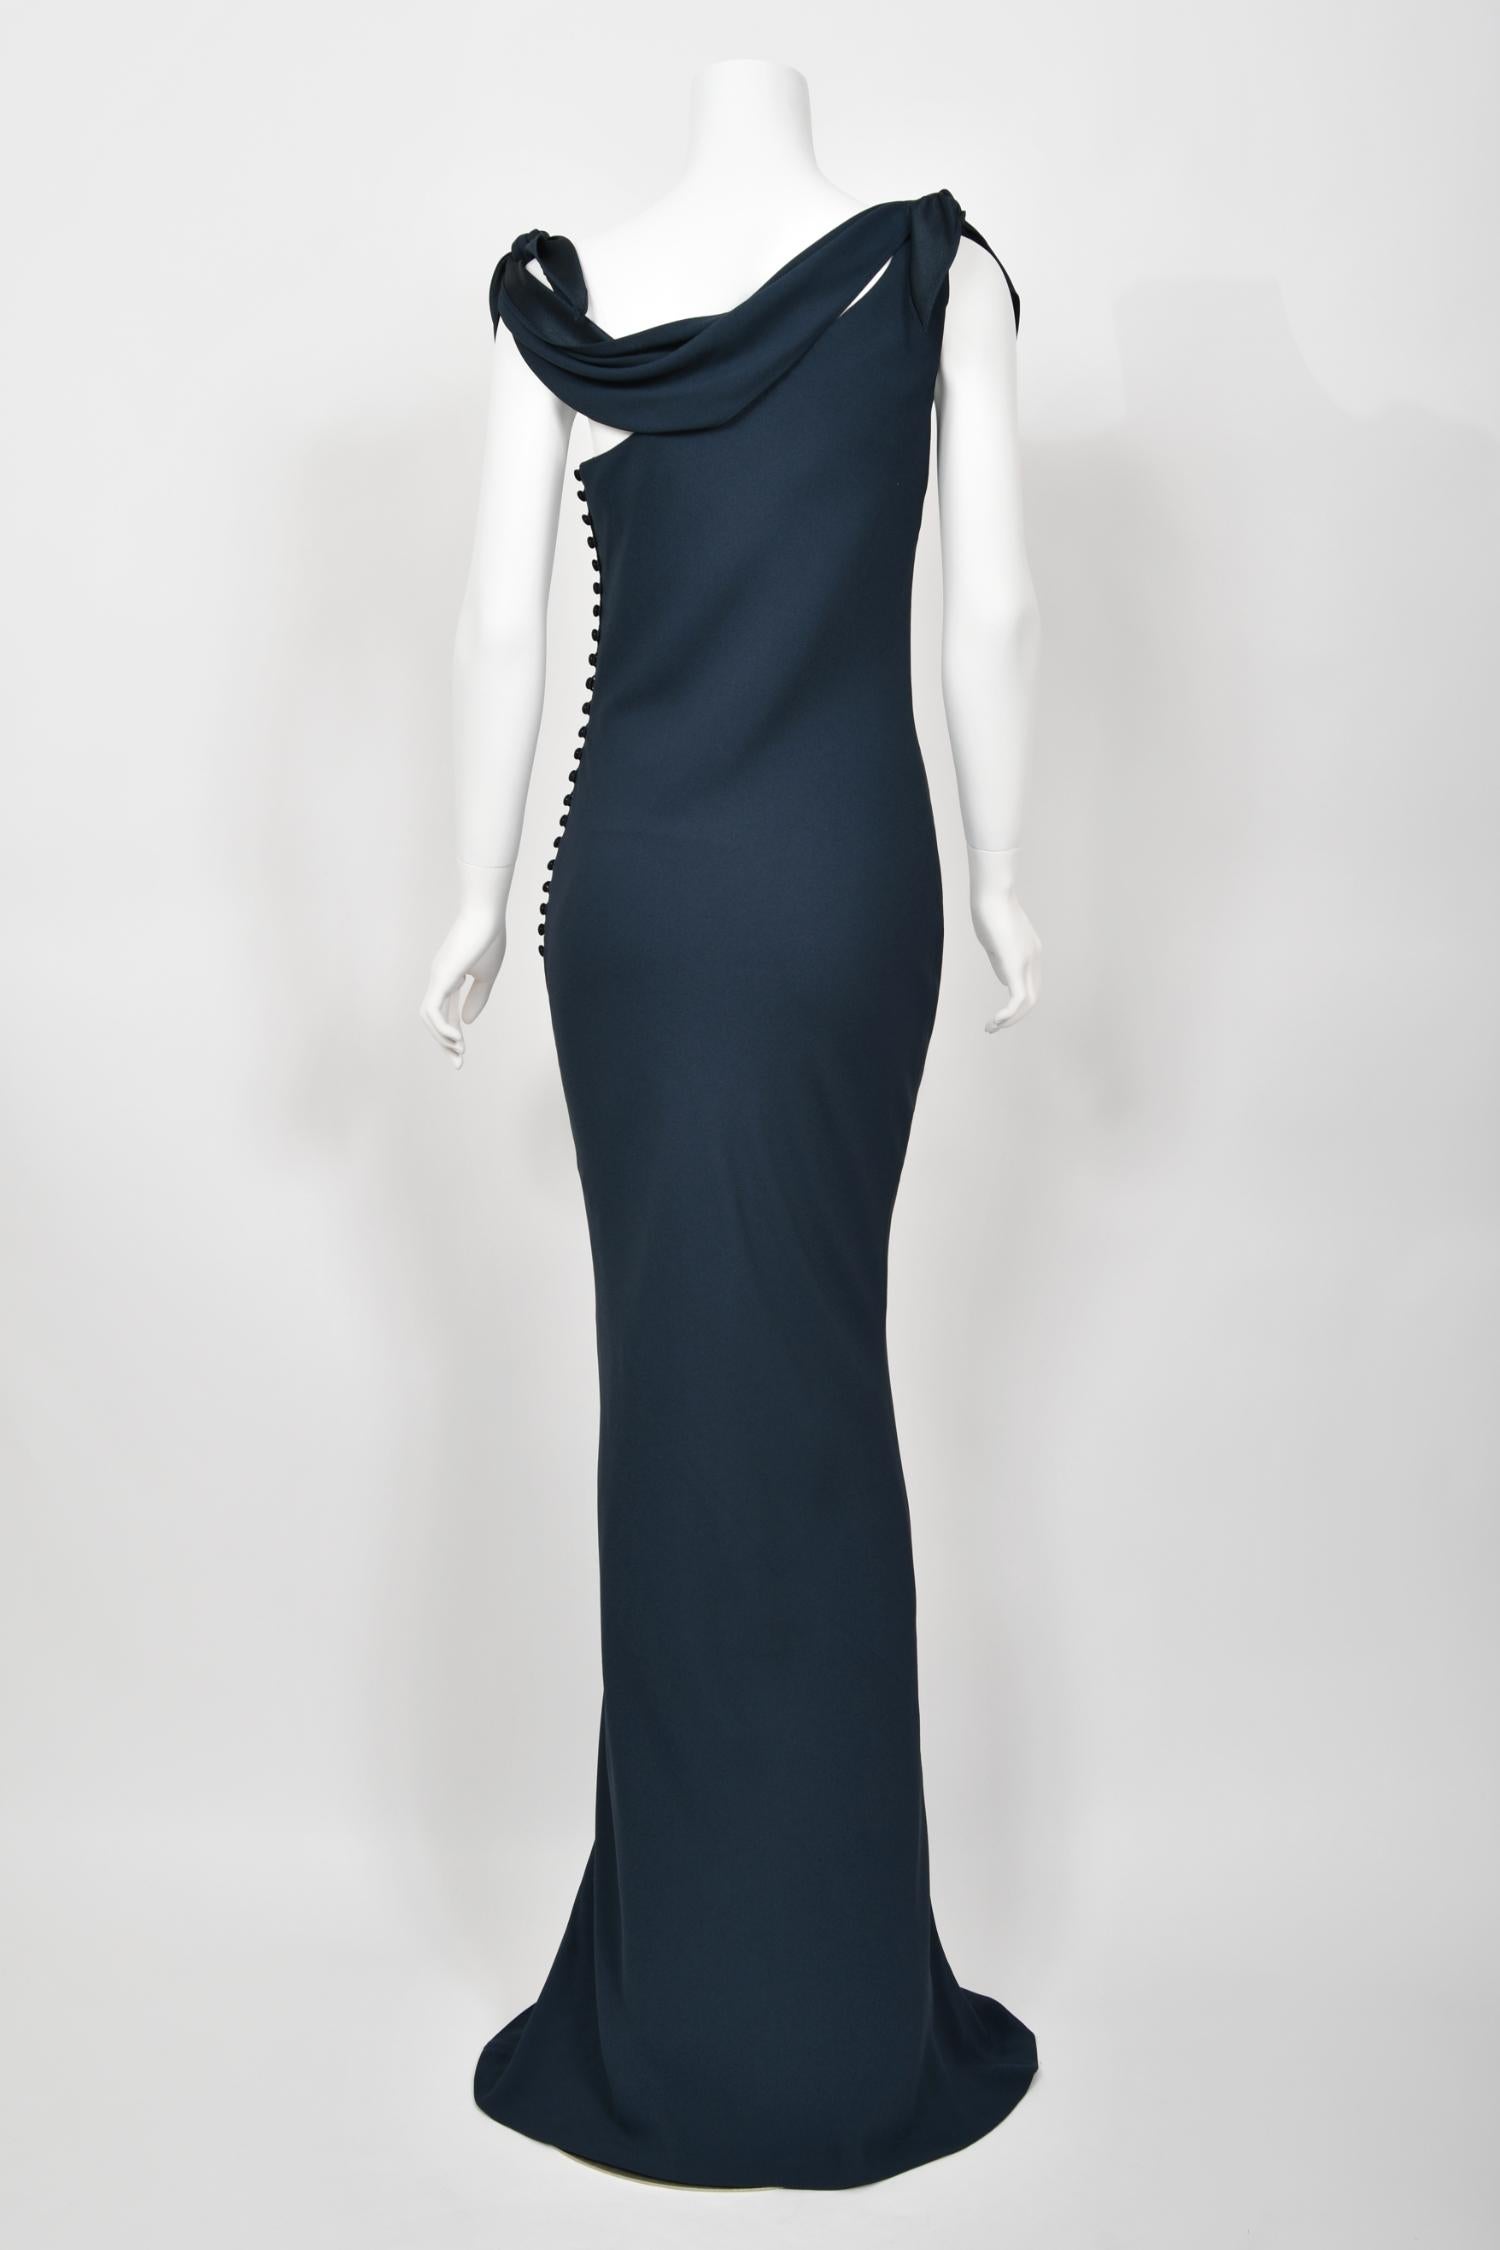 1998 Christian Dior by John Galliano Navy Blue Silk Draped Bias-Cut Evening Gown For Sale 7